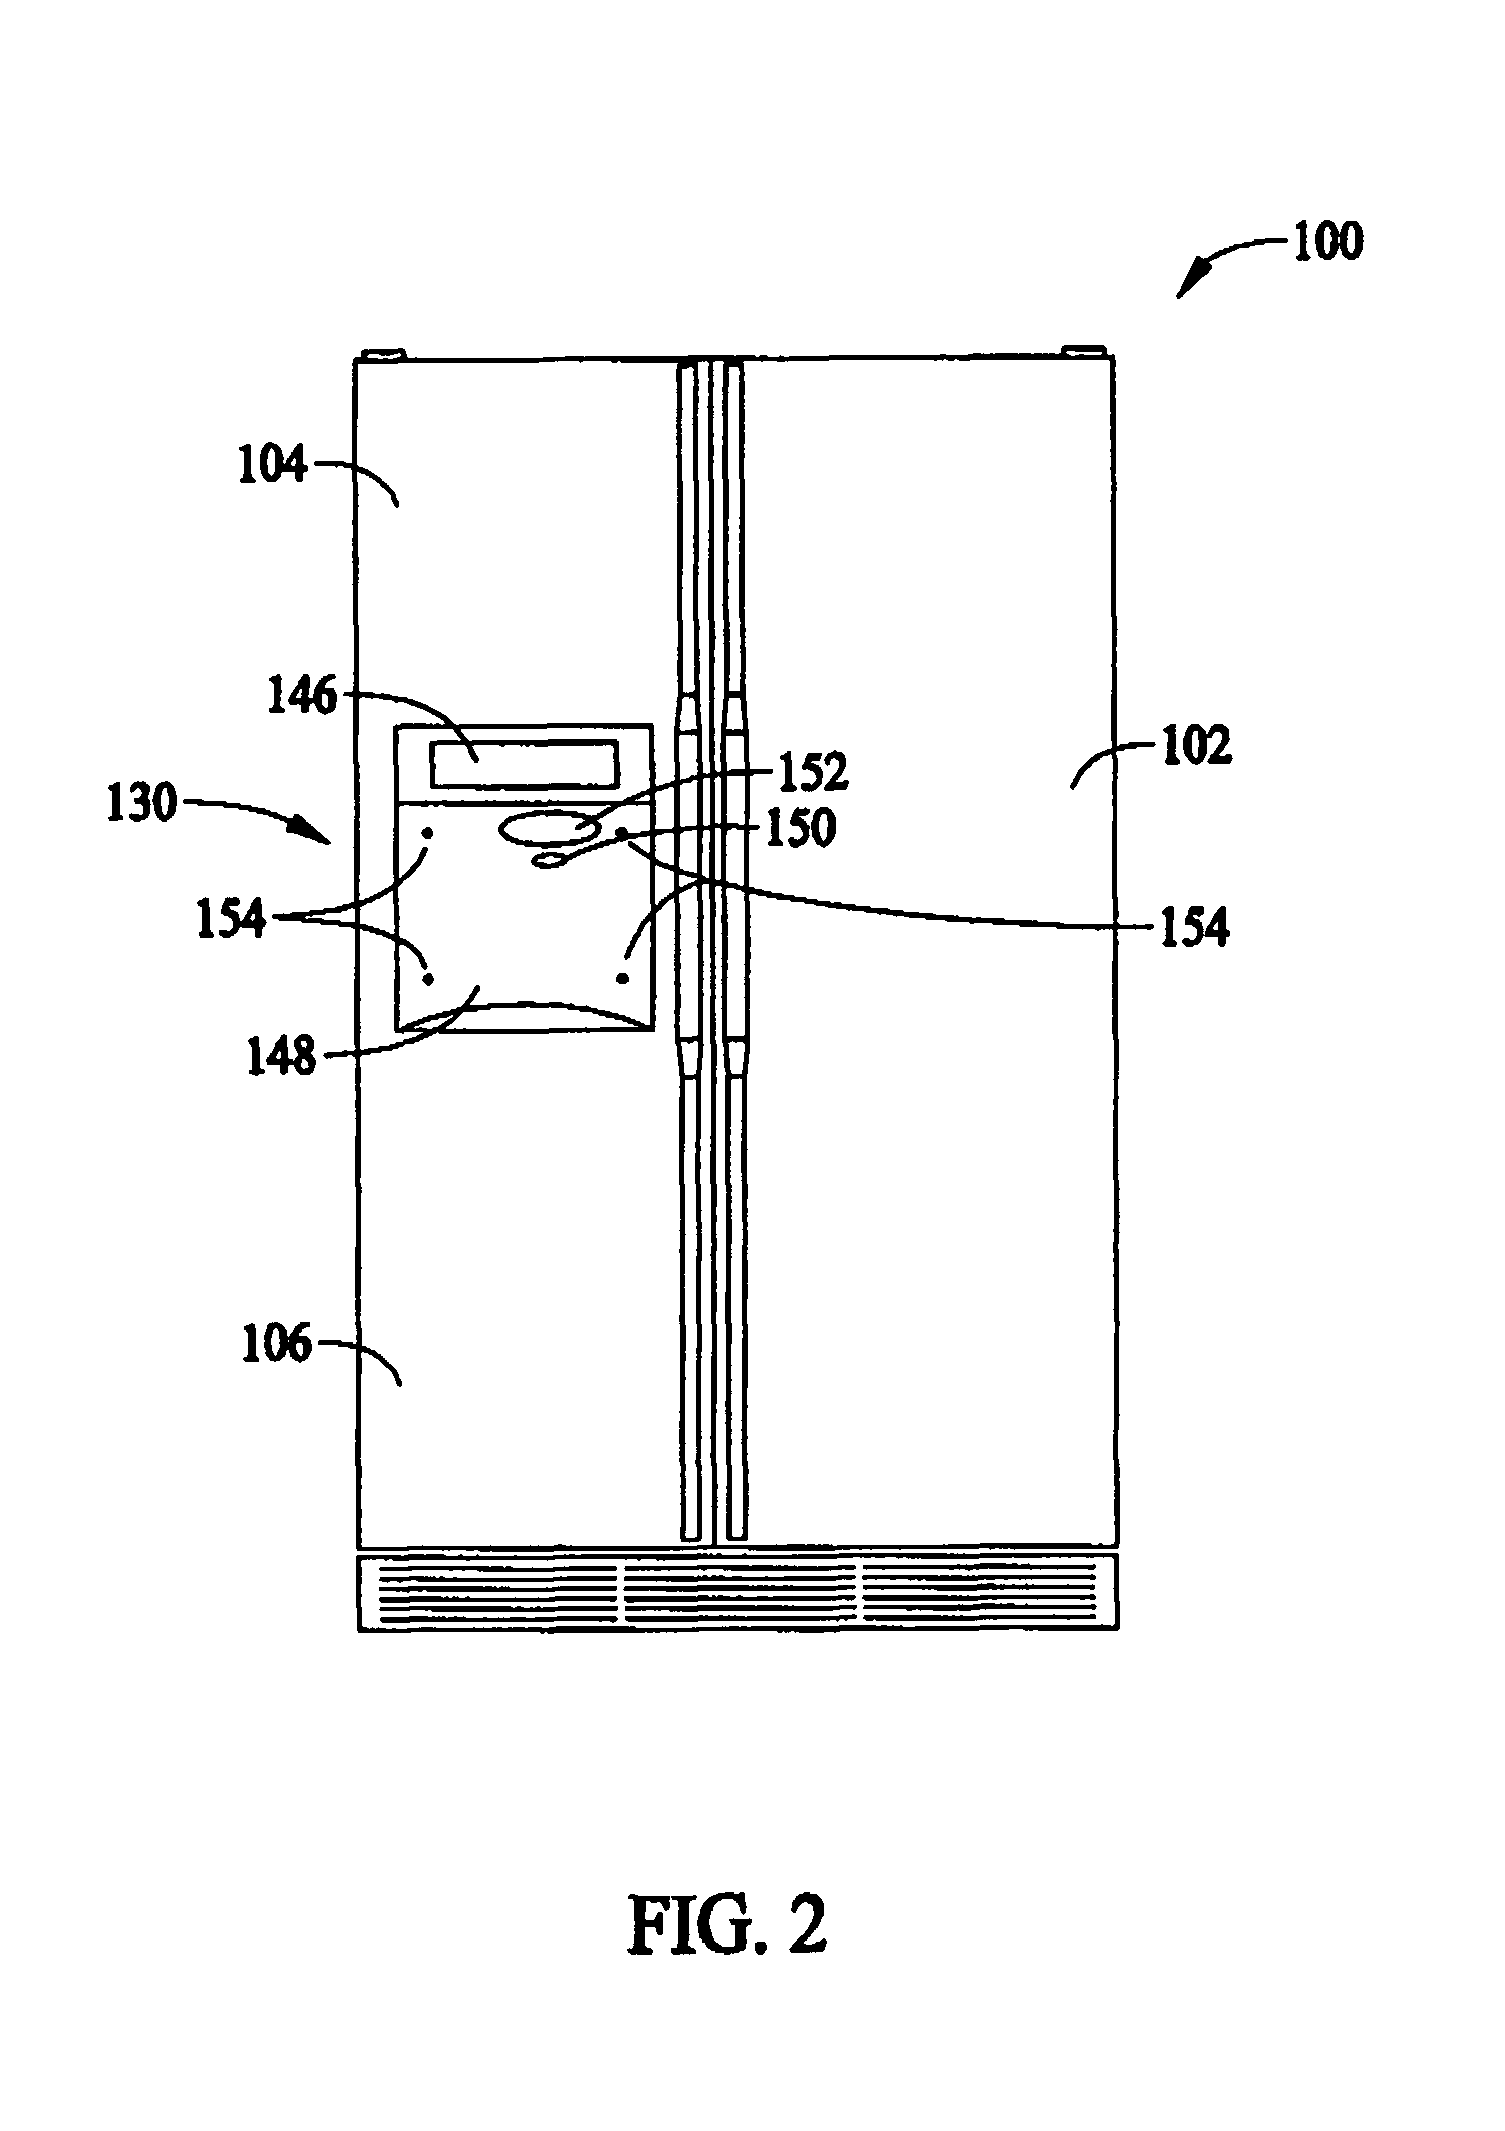 Method and apparatus for dispensing ice and water